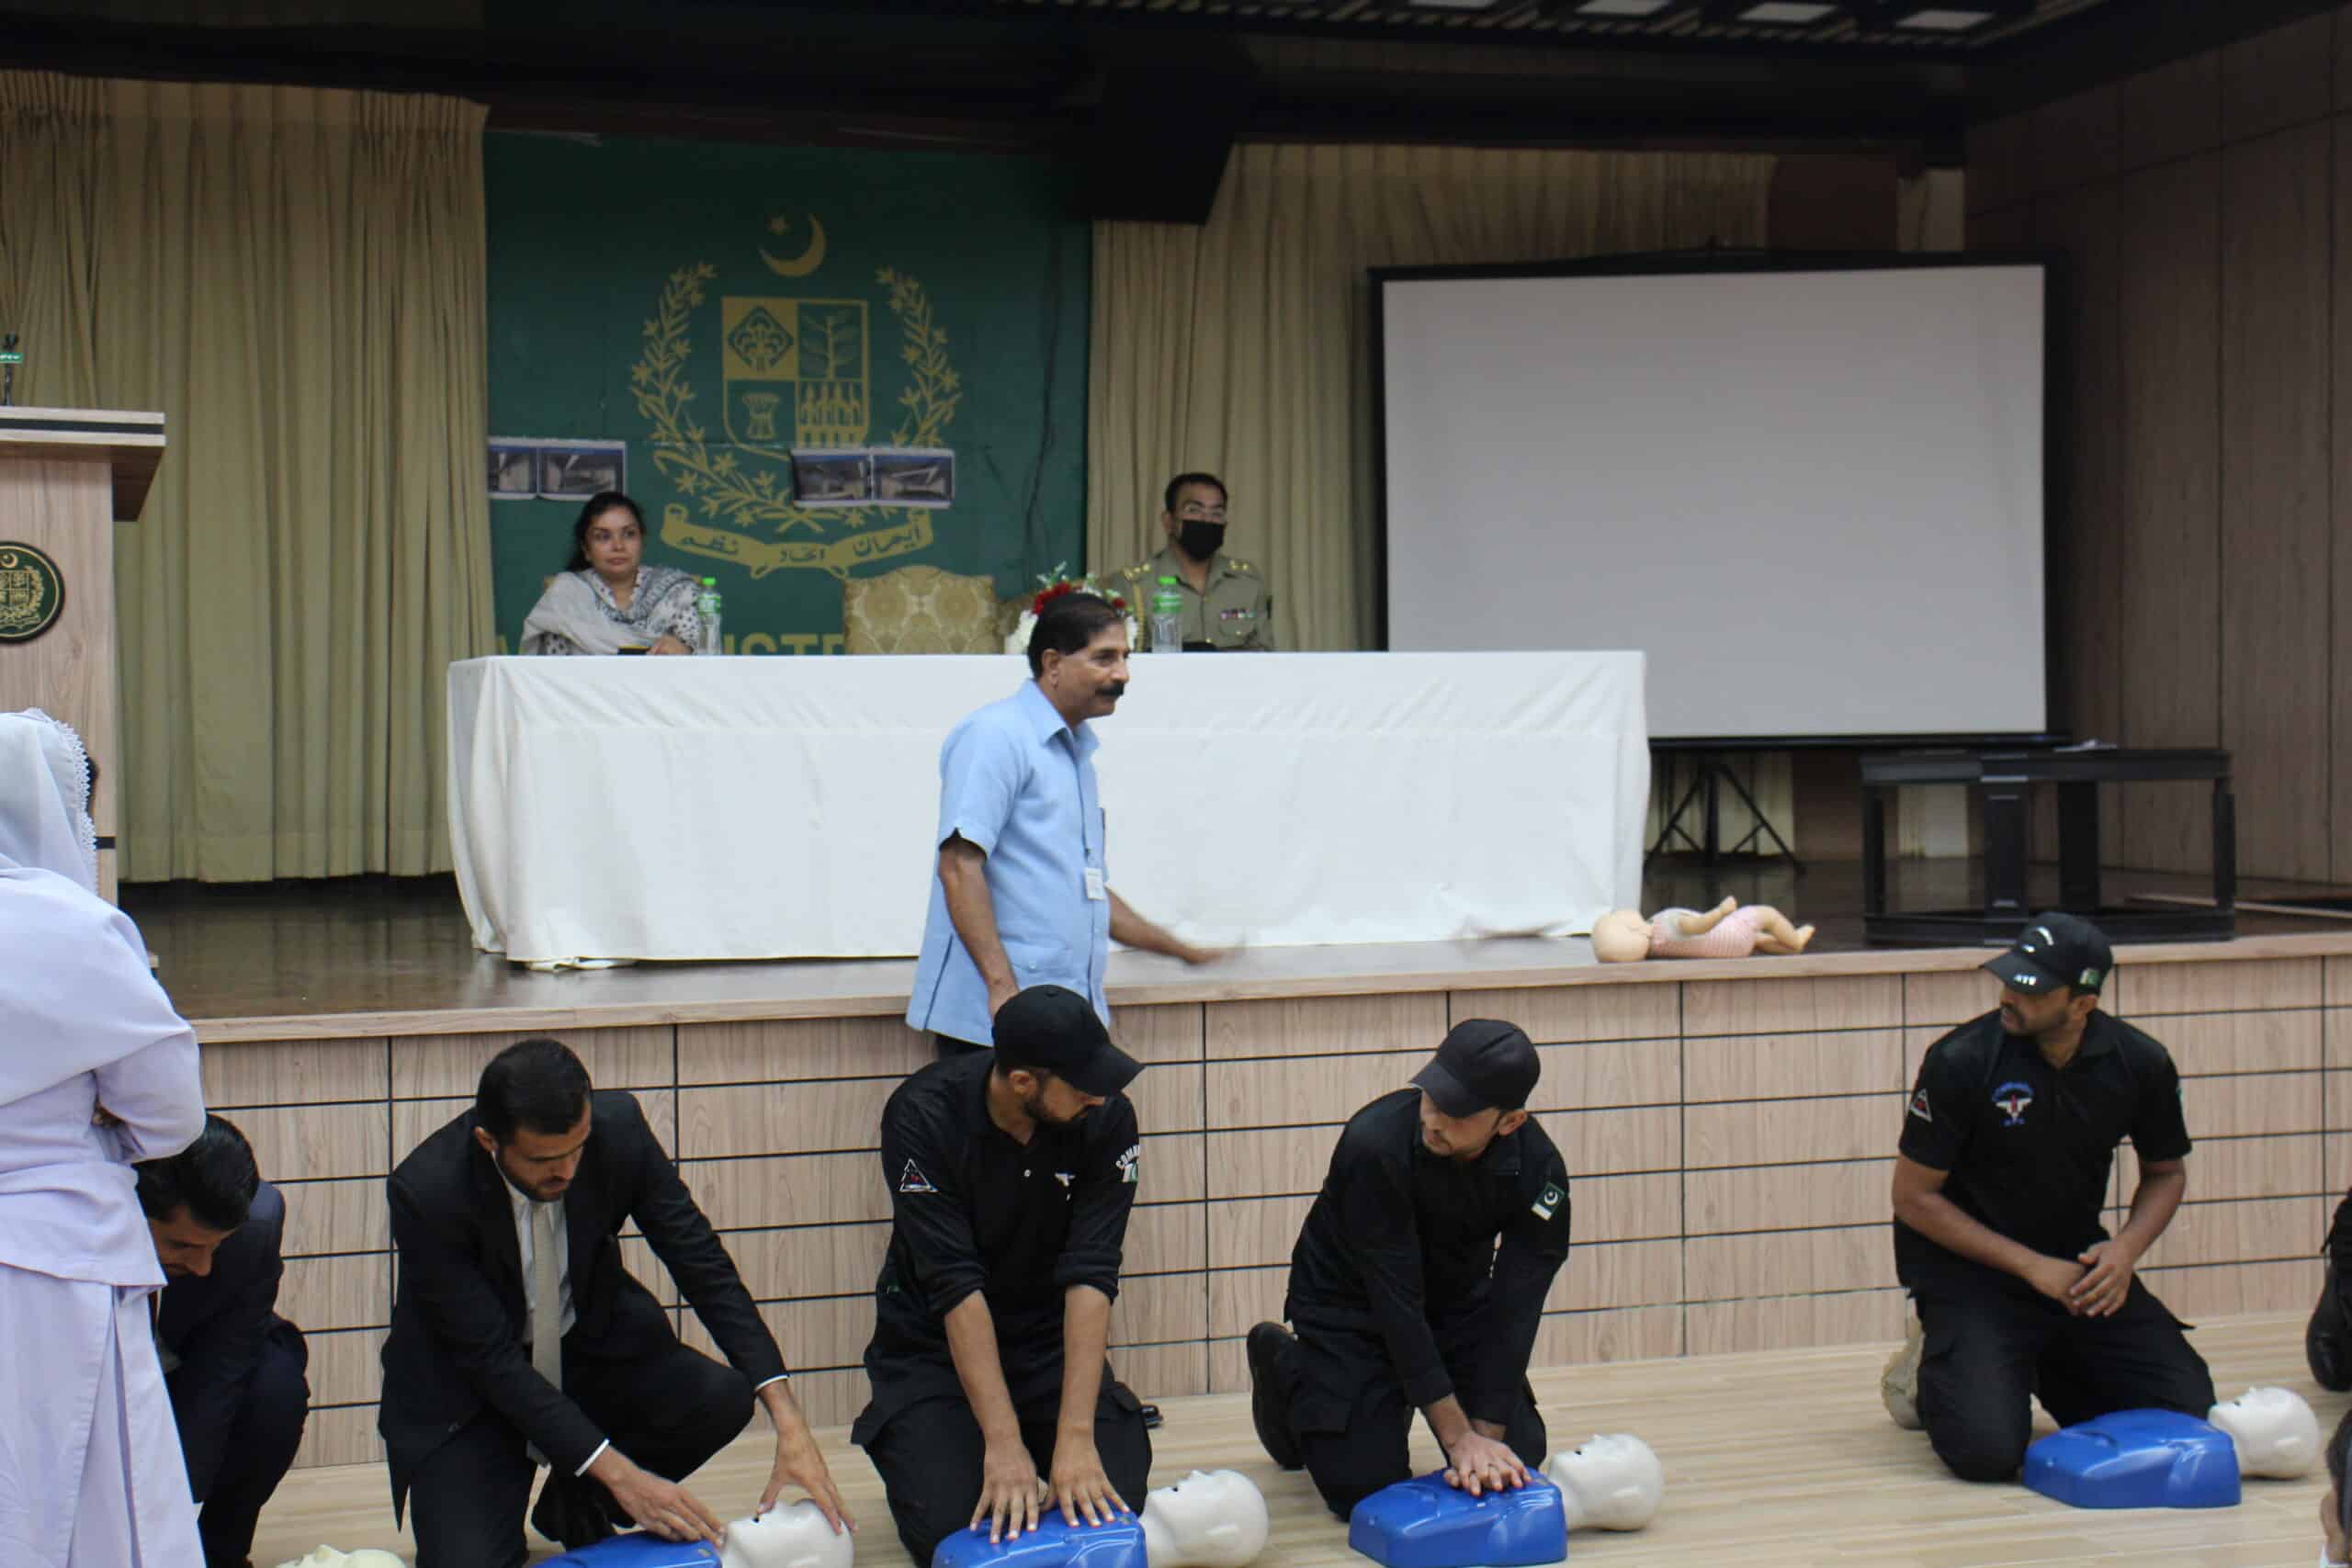 Panah arranged an CPR training at PM House